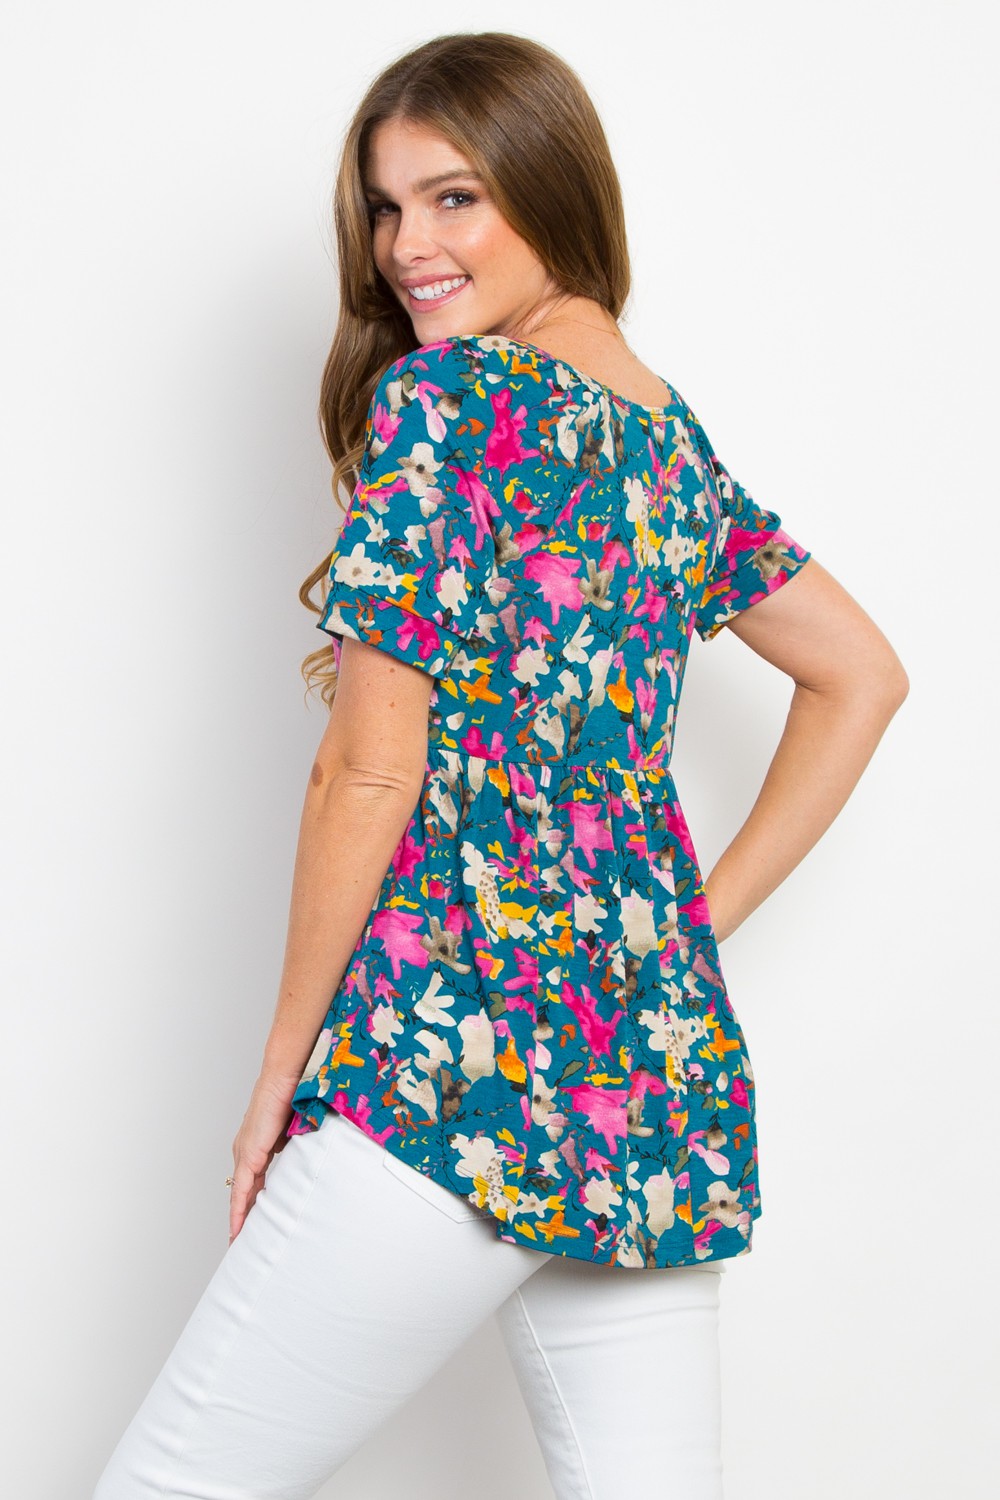 Forever in Florals Babydoll Top in Teal - Curvy